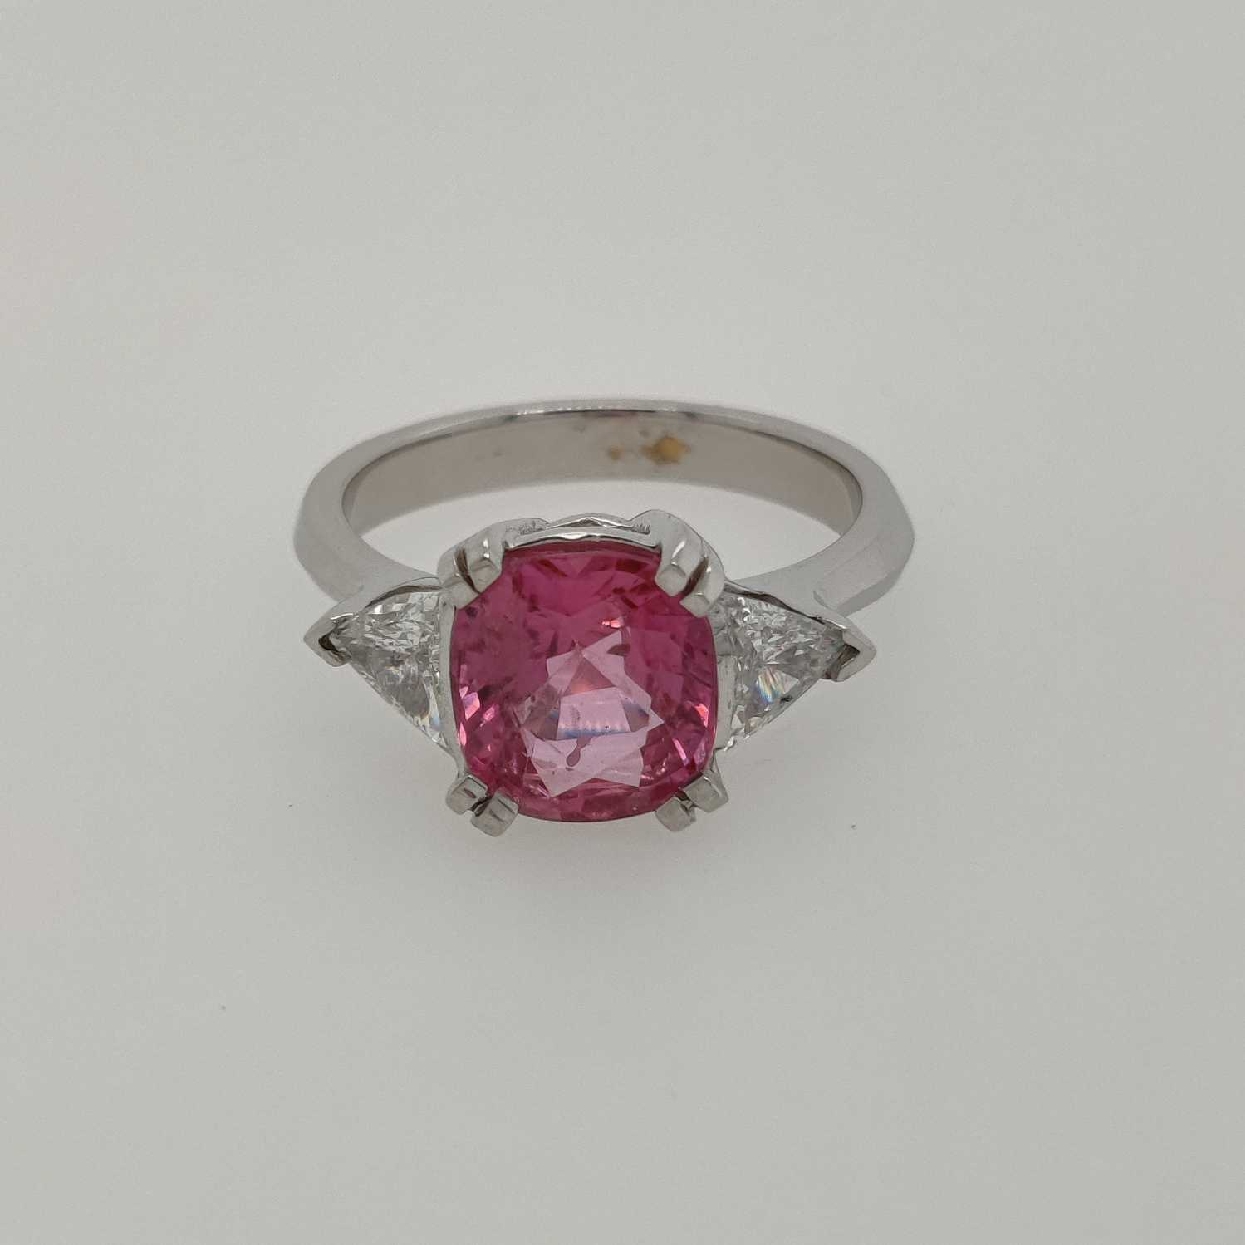 Platinum Ring with Cushion Cut Pink Sapphire and Two Trillion Cut Diamonds Size 7